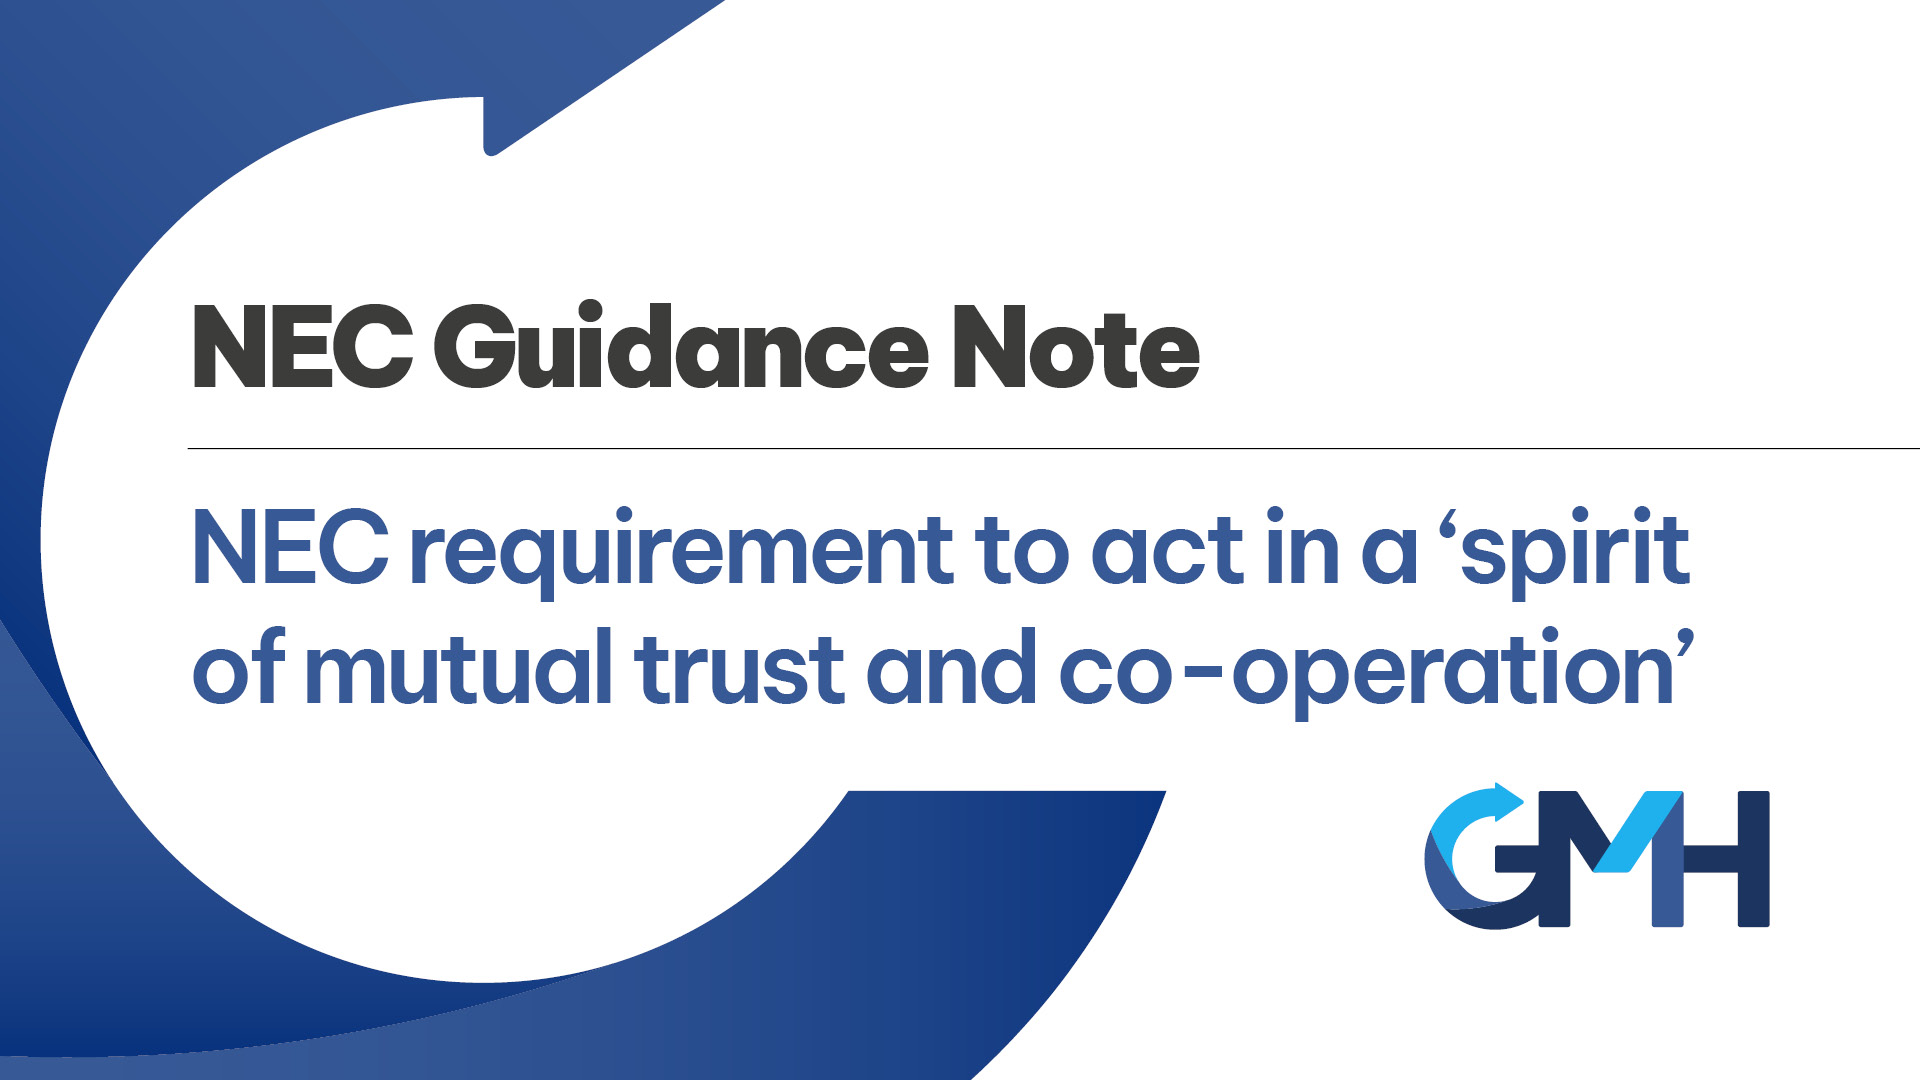 NEC requirement to act in a “spirit of mutual trust and co-operation” NEC Guidance Note